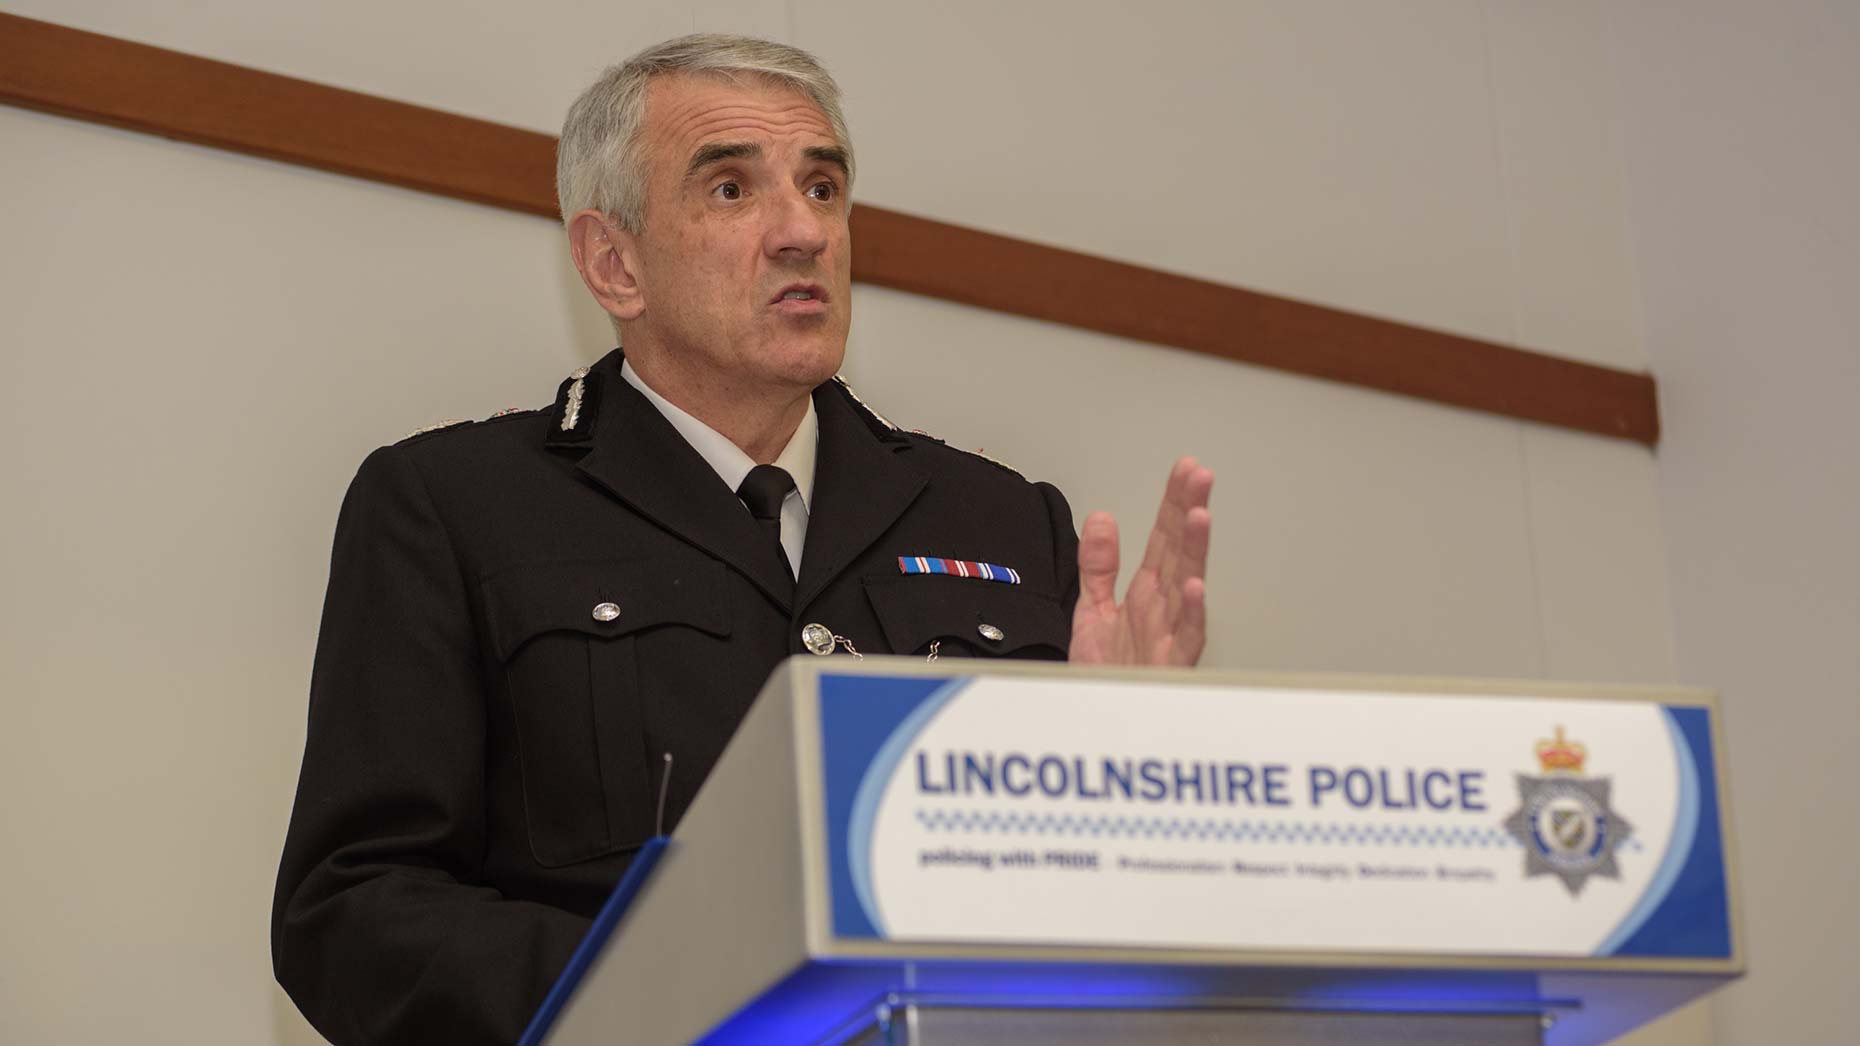 Police Chief Constable Neil Rhodes. Photo: Steve Smailes for The Lincolnite